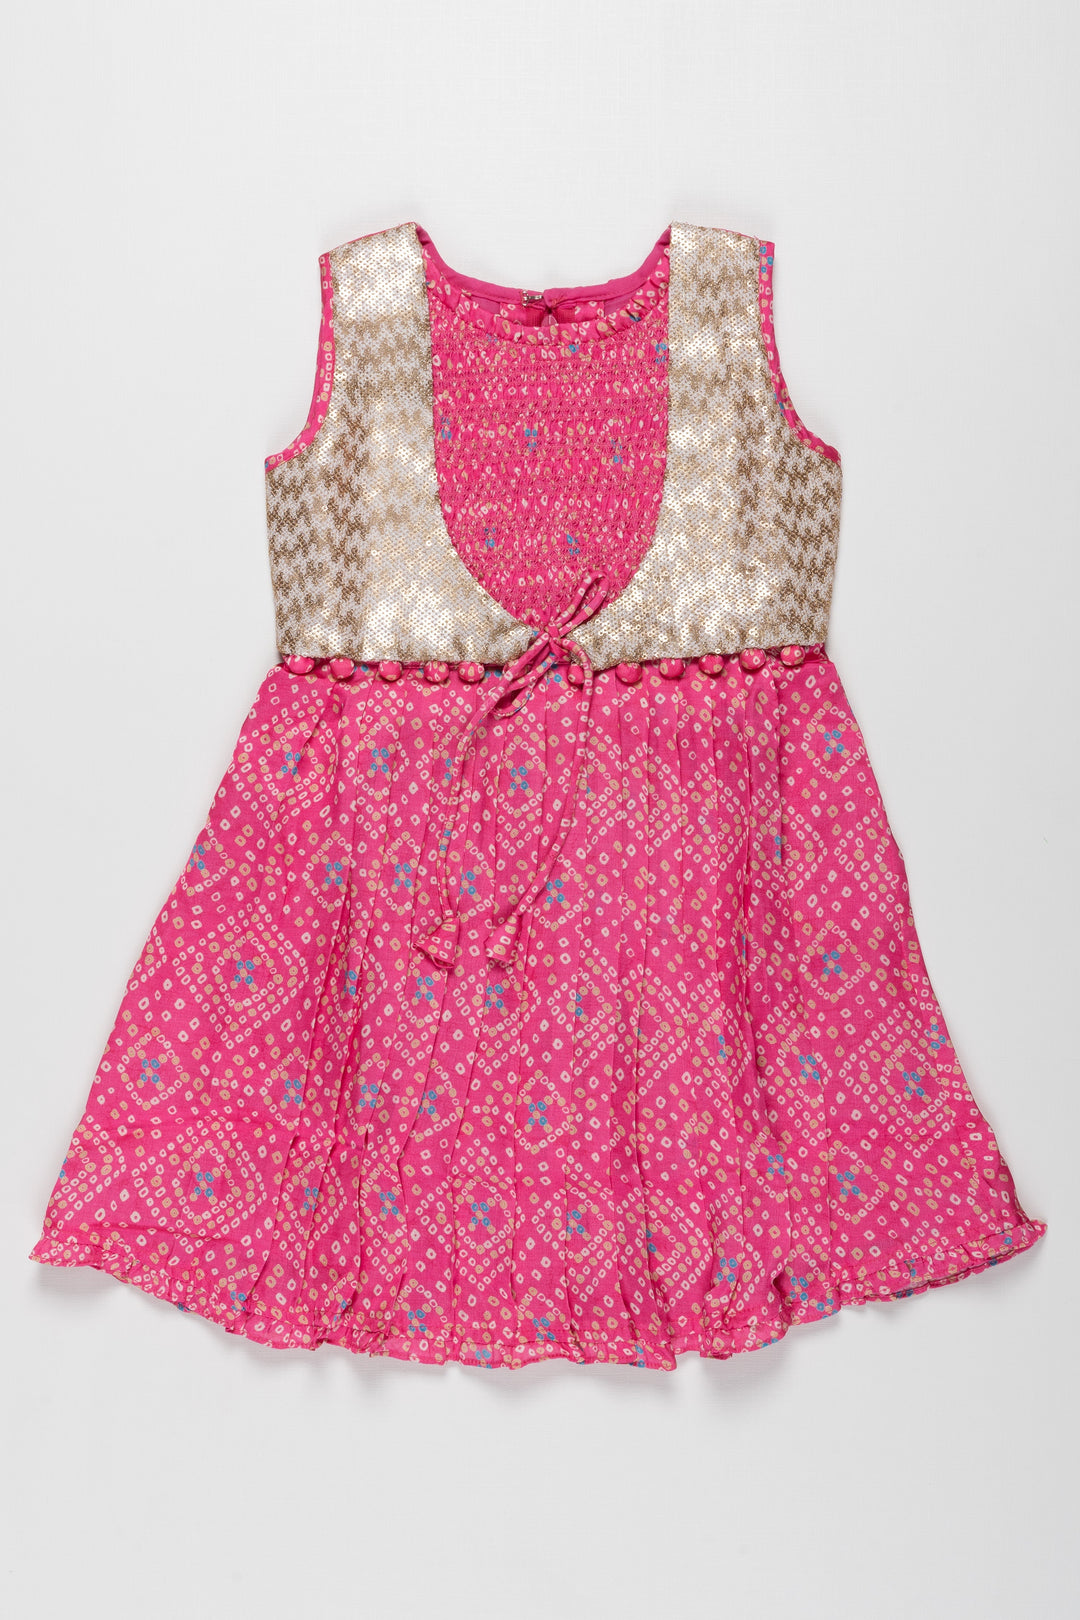 The Nesavu Girls Cotton Frock Elegant Cotton Frock for Girls with Sequined Accents - Perfect for Special Occasions Nesavu 22 (4Y) / Pink / Cotton GFC1320B-22 Buy Girls Special Occasion Cotton Frocks | Elegant Designs Online | The Nesavu